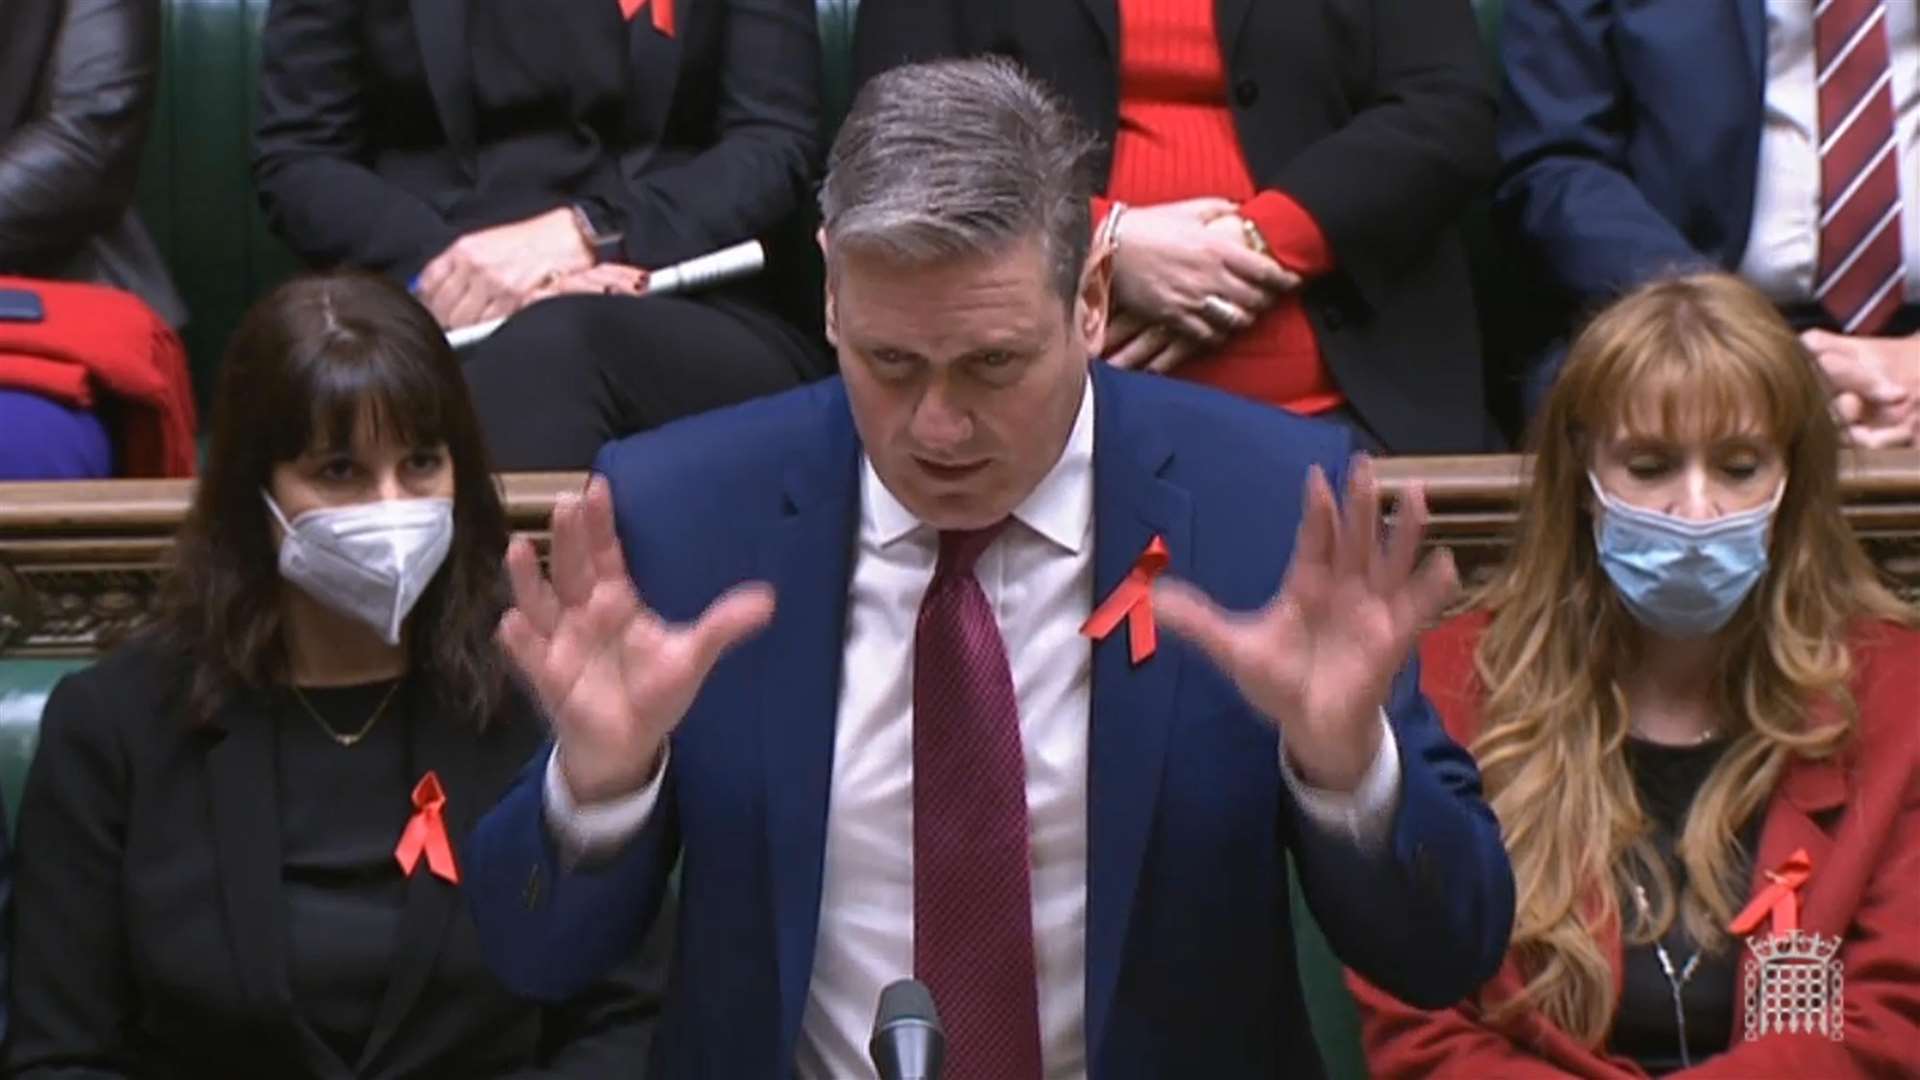 Labour leader Keir Starmer speaks during Prime Minister’s Questions in the House of Commons, London. Picture date: Wednesday December 1, 2021 (PA)